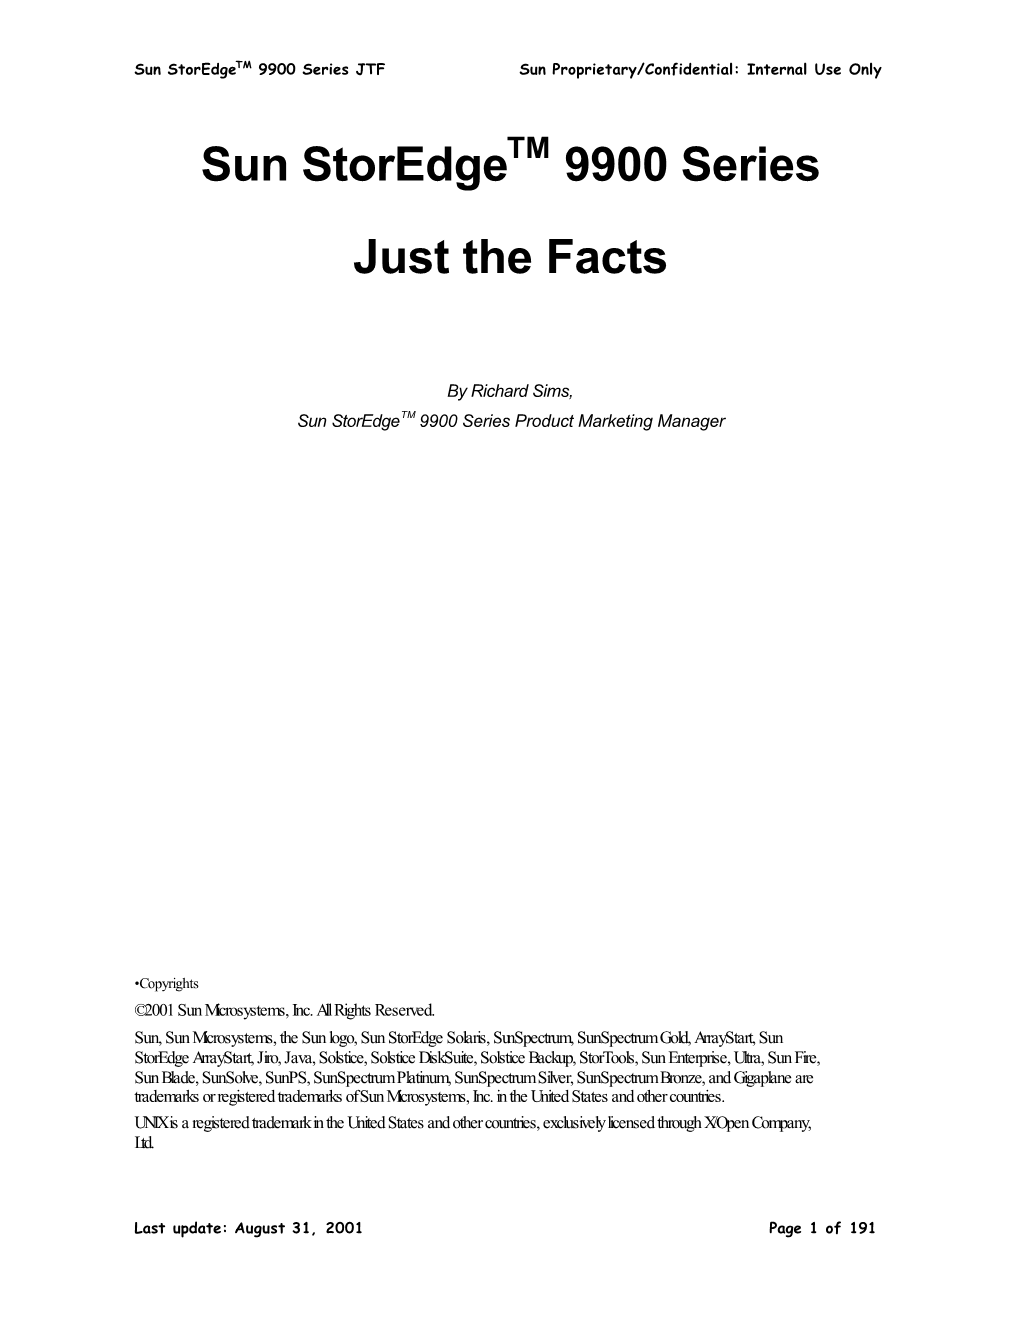 Sun Storedge 9900 Series Just the Facts